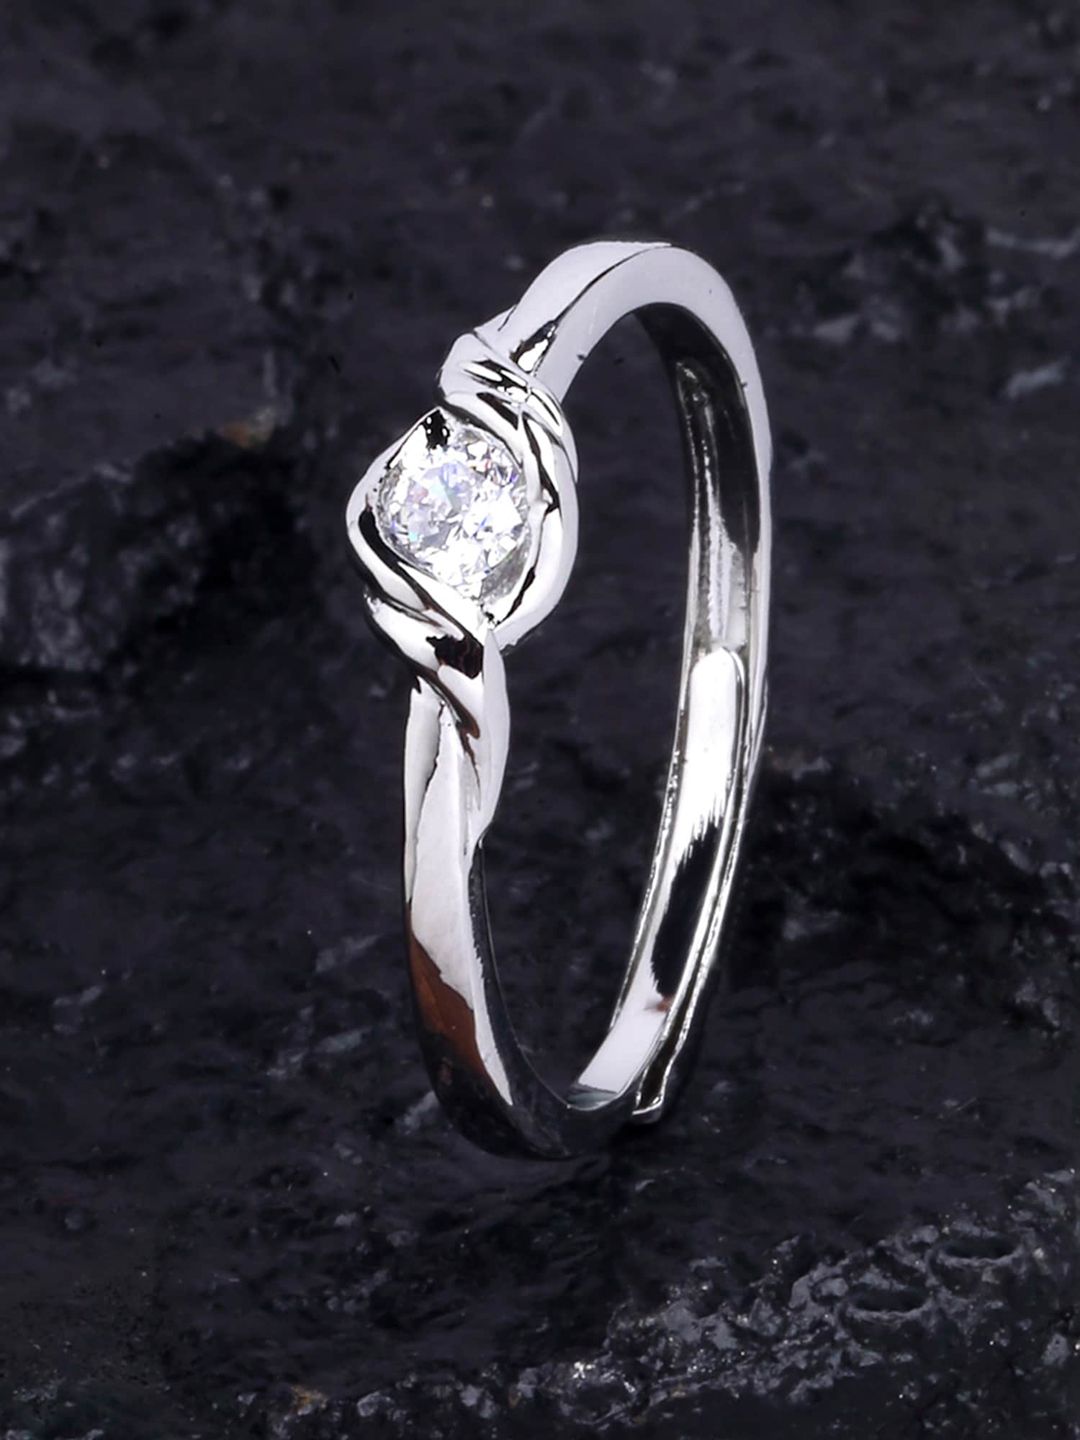 KARATCART Silver-Plated White Stone-Studded Adjustable Finger Ring Price in India